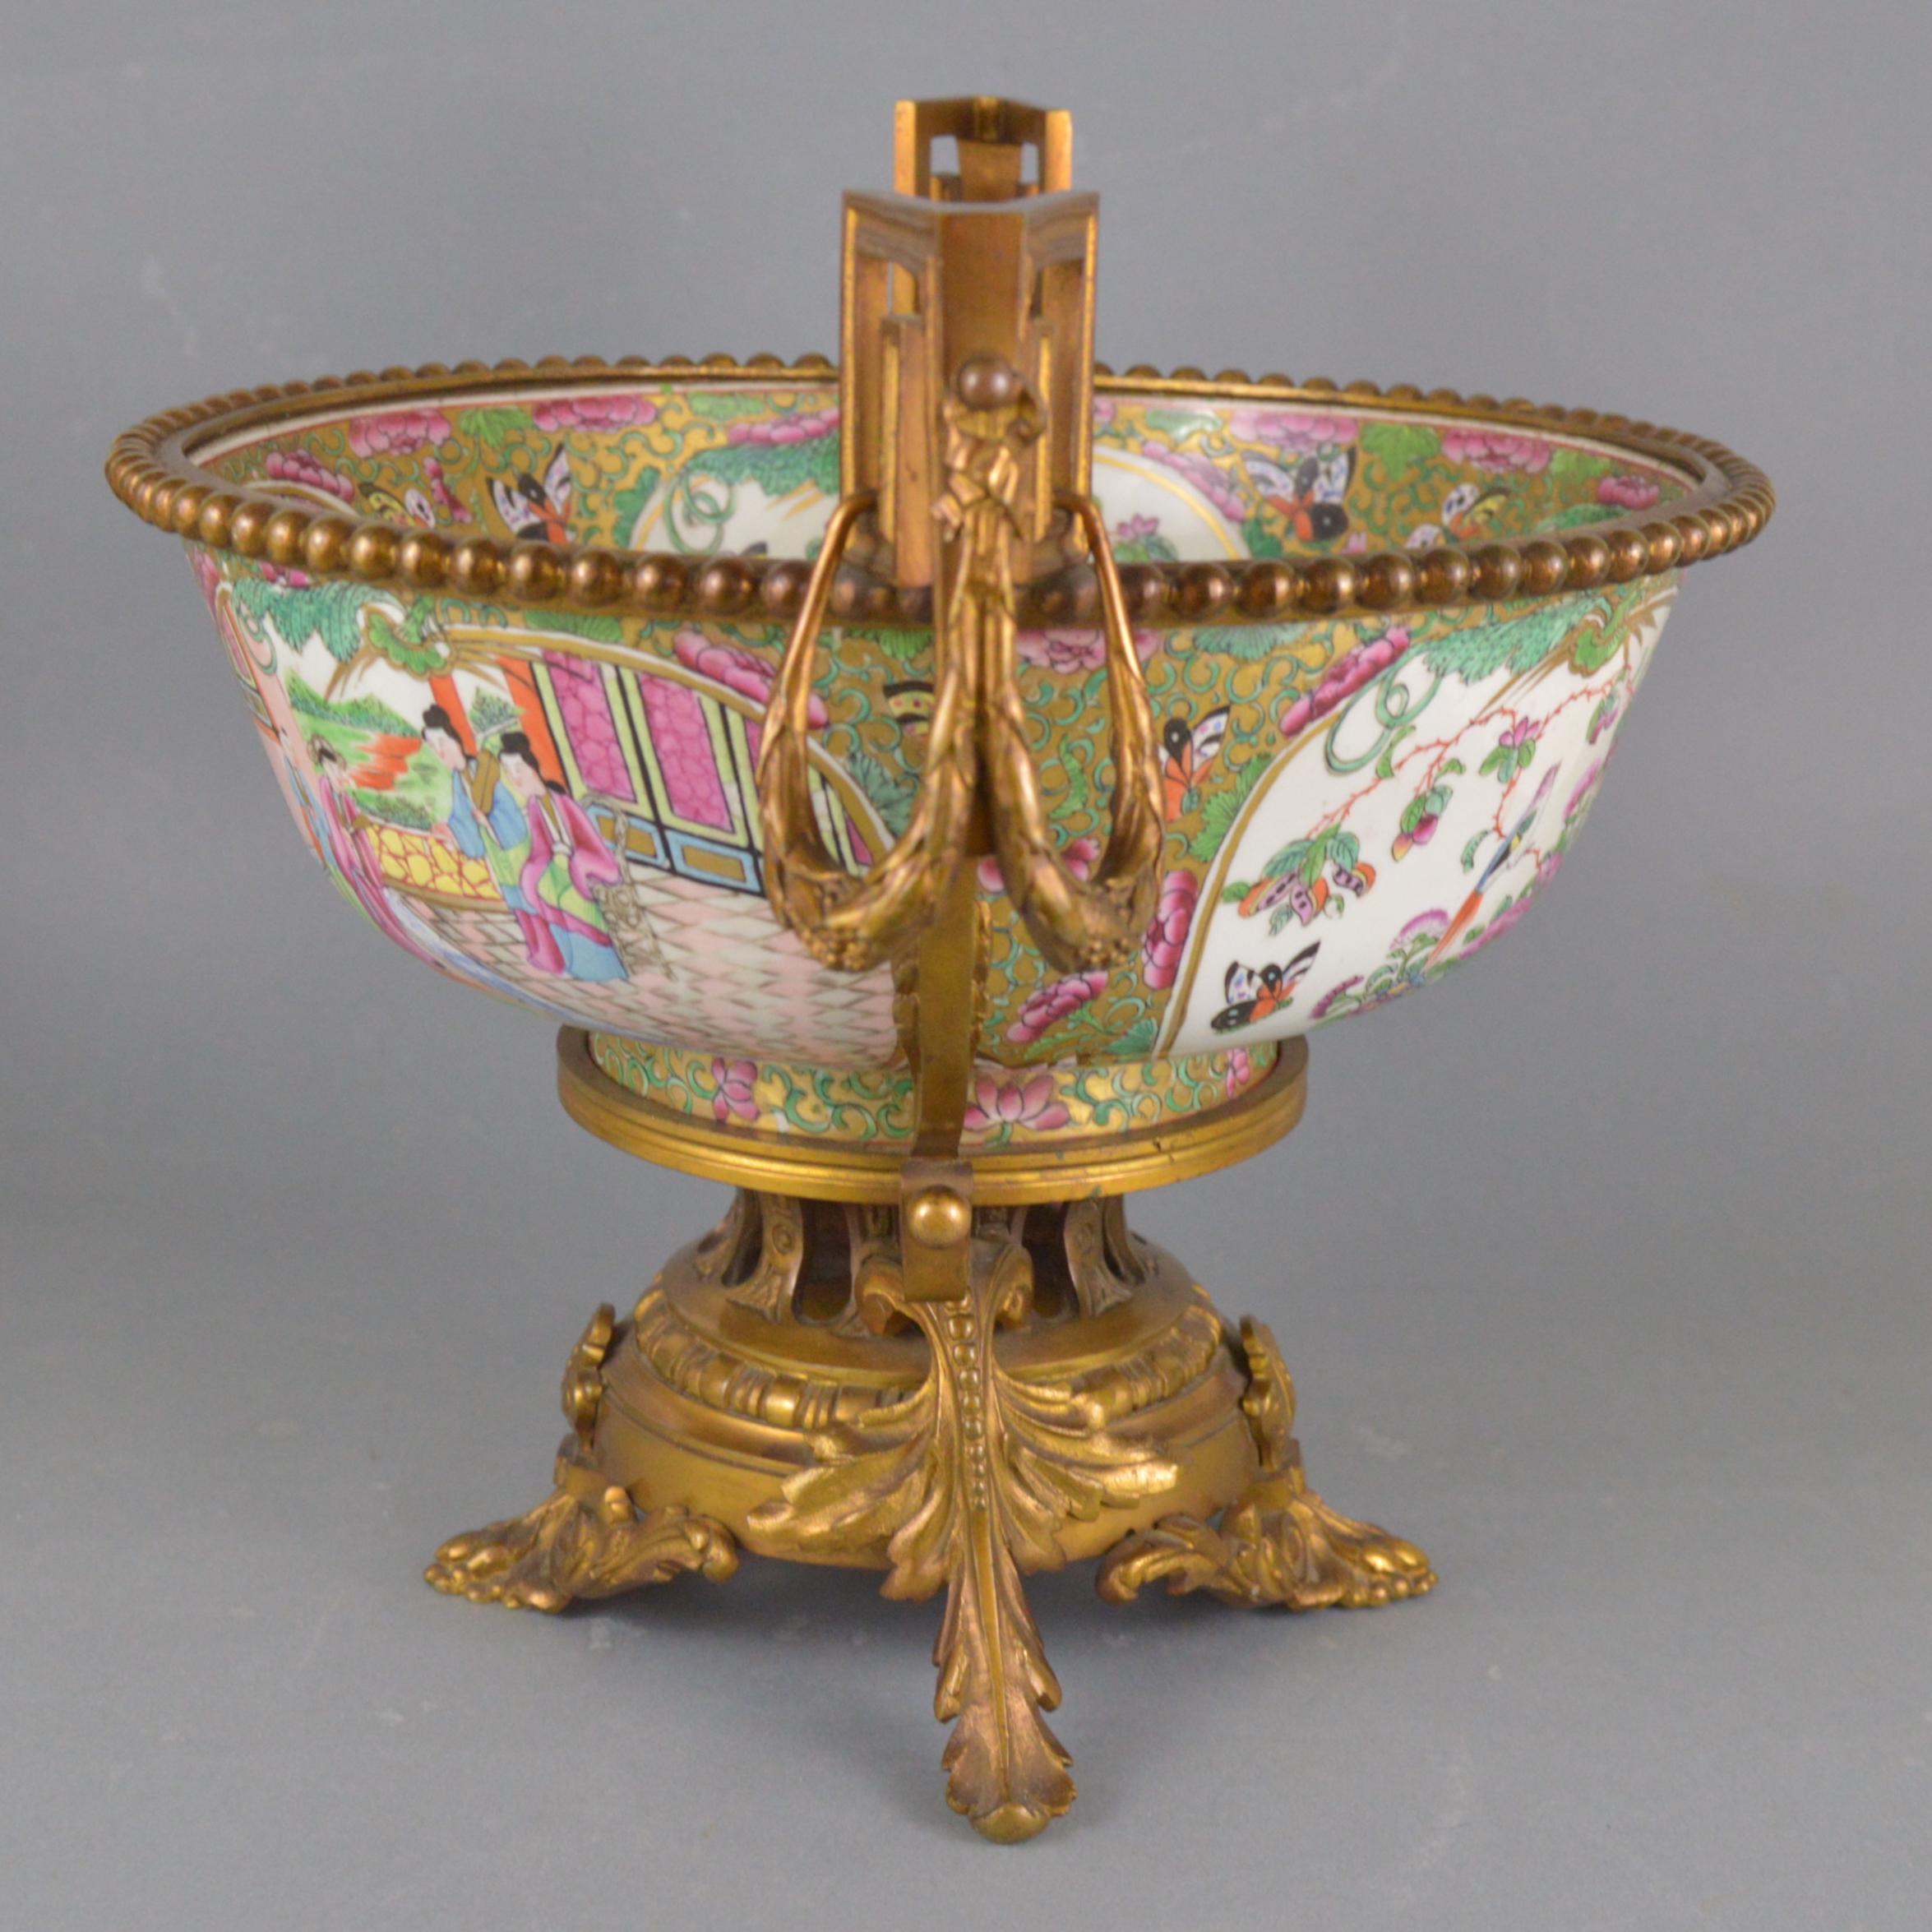 19th Century Chinese Gilt Bronze-Mounted Canton Porcelain Bowl (Chinesisch)